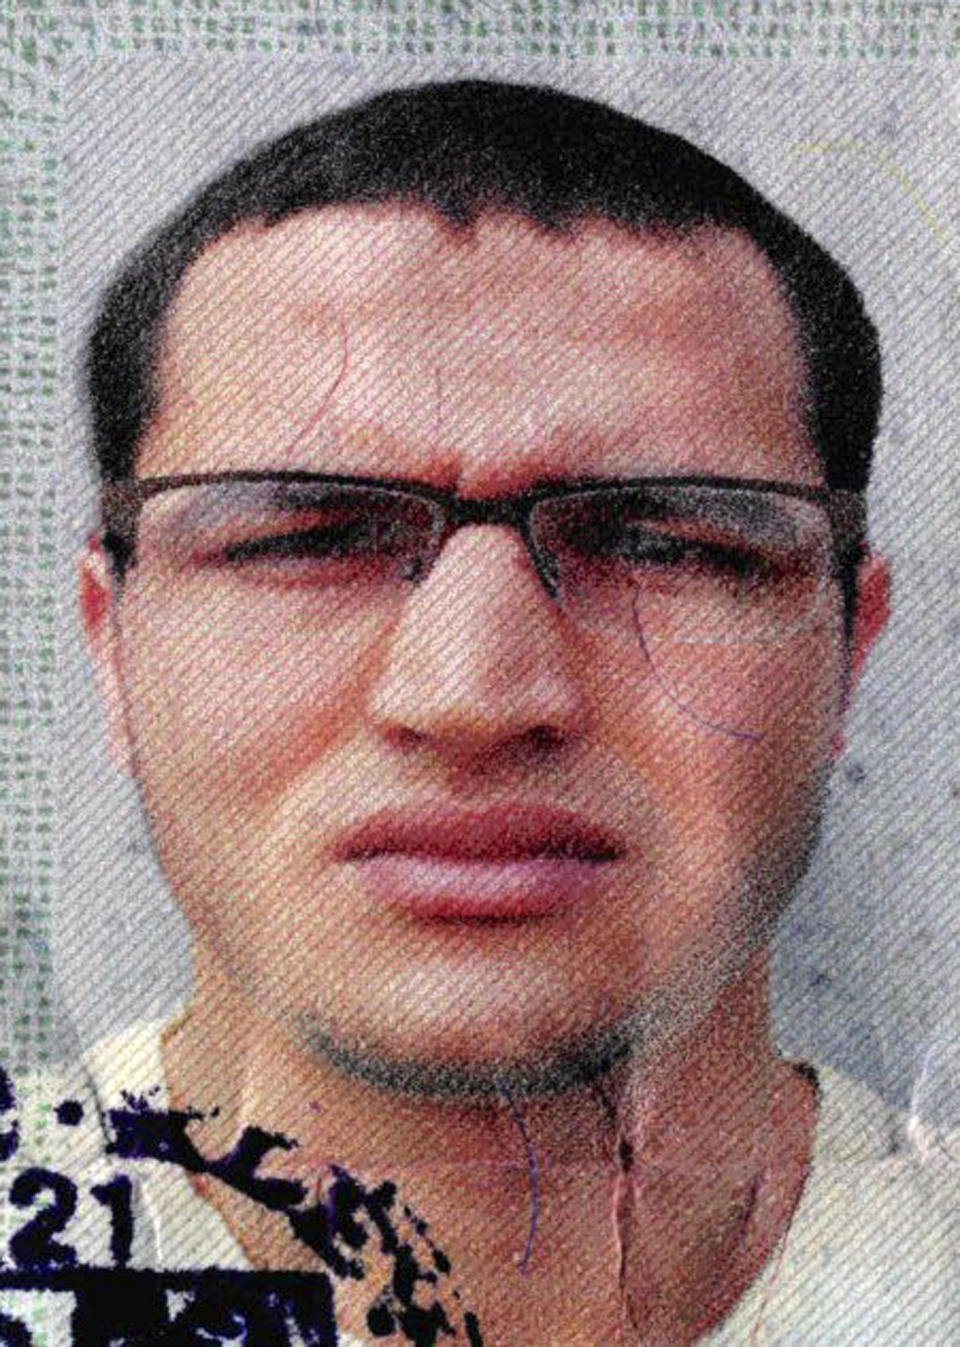 FILE -The photo issued by German federal police on Dec. 21, 2016 shows 24-year-old Tunisian Anis Amri on a photo that was used on the documents found in the truck that plowed into a Christmas market in Berlin Dec. 19. Prosecutors in western Germany say Thursday Dec. 29, 2016 they opened a fraud investigation earlier this year against Anis Amri, the main suspect in last week's Berlin truck attack, suspecting that he simultaneously claimed benefits in two towns under different identities. (German police via AP)